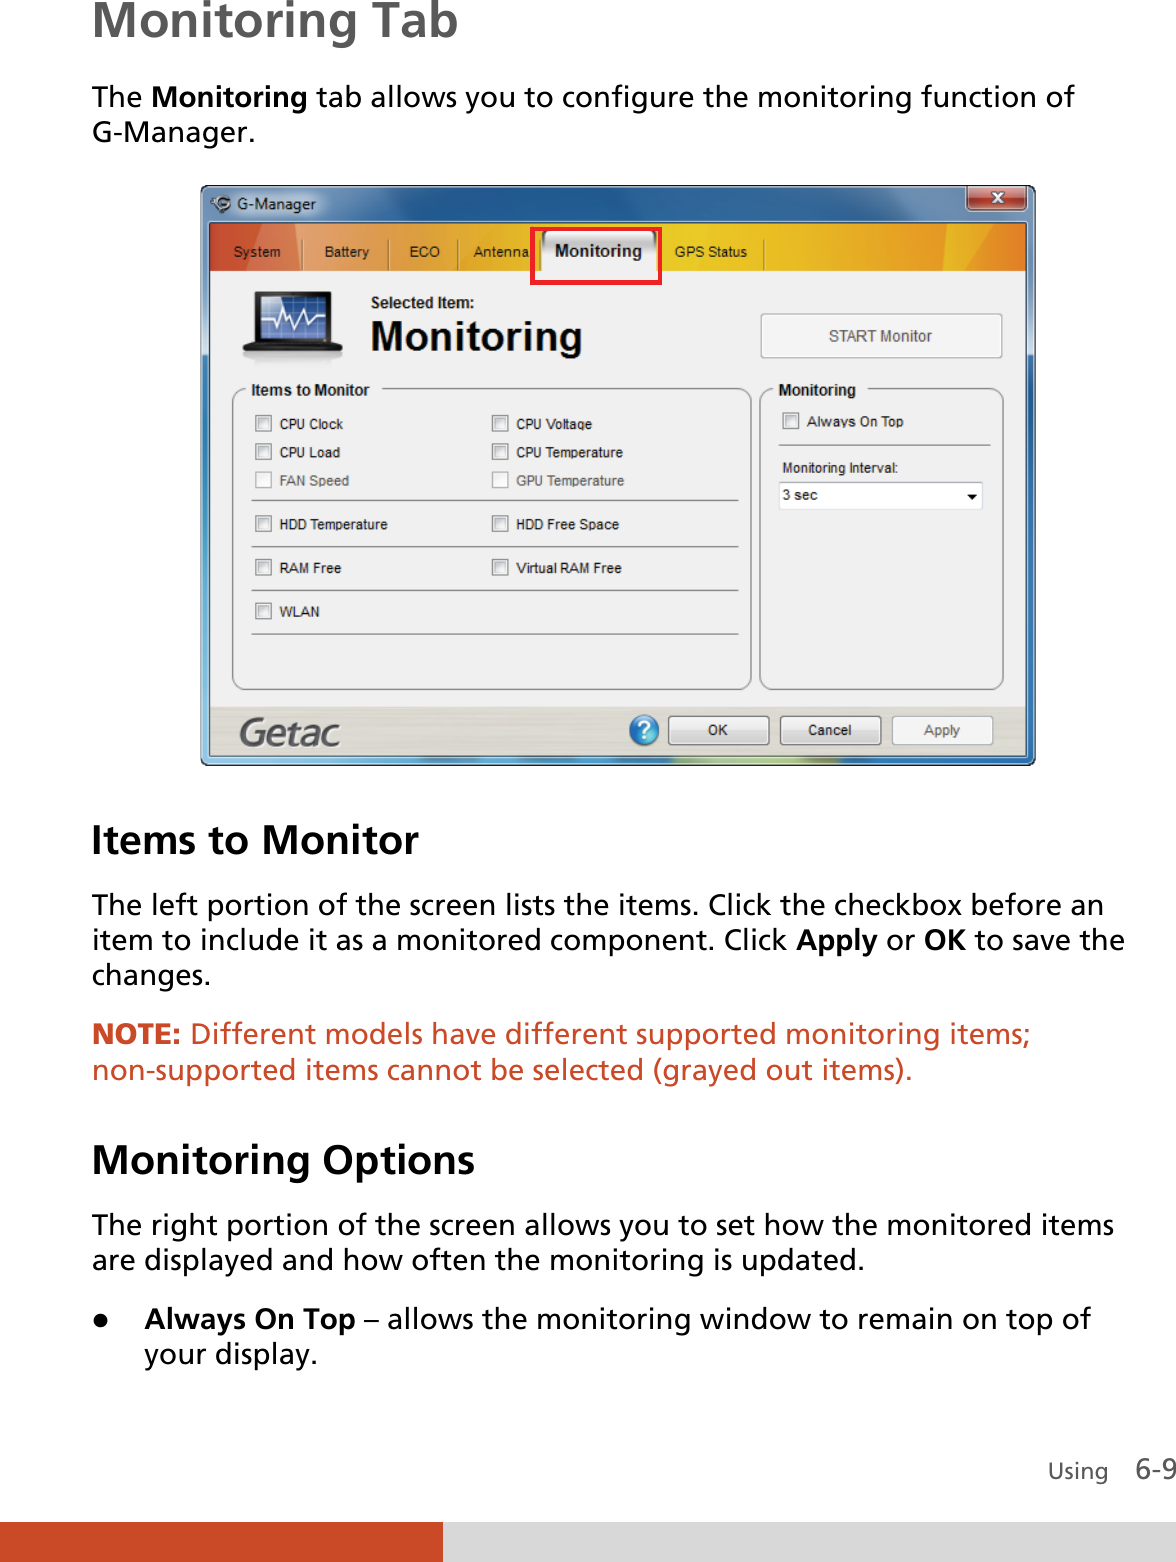  Using    6-9 Monitoring Tab The Monitoring tab allows you to configure the monitoring function of G-Manager.  Items to Monitor The left portion of the screen lists the items. Click the checkbox before an item to include it as a monitored component. Click Apply or OK to save the changes. NOTE: Different models have different supported monitoring items; non-supported items cannot be selected (grayed out items).  Monitoring Options The right portion of the screen allows you to set how the monitored items are displayed and how often the monitoring is updated. z Always On Top – allows the monitoring window to remain on top of your display. 